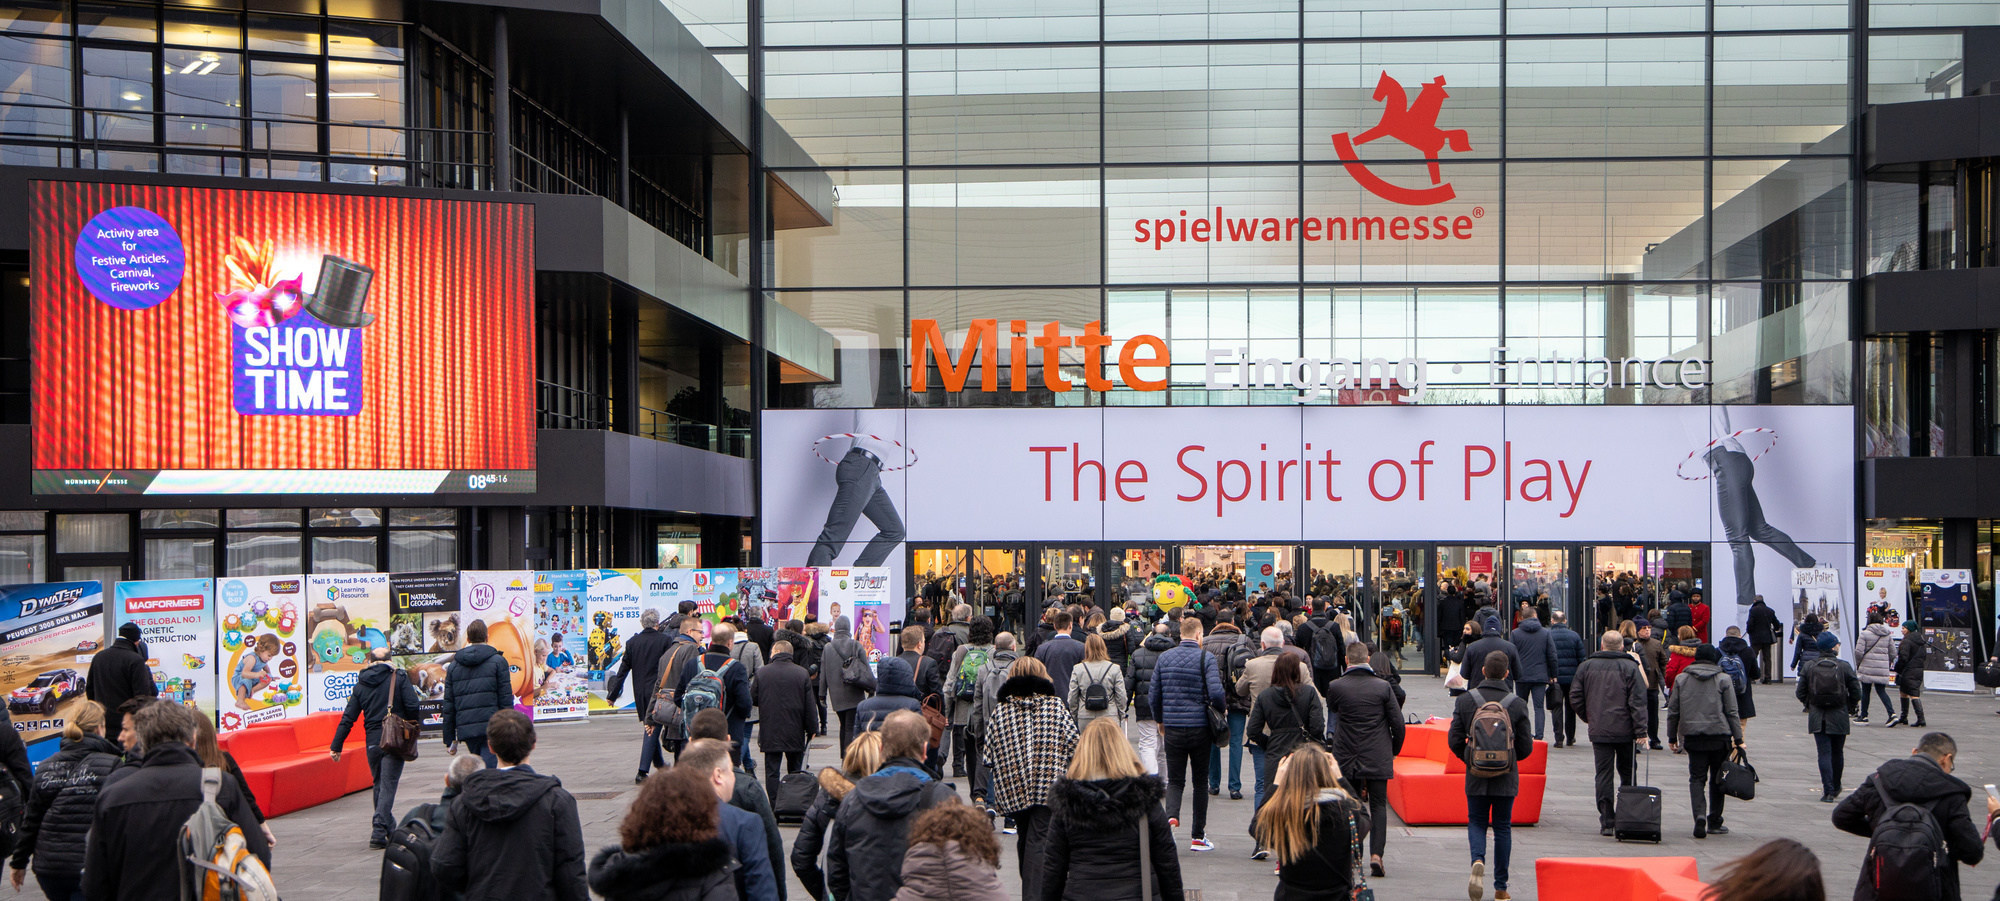 The 71st Spielwarenmesse achieves new highs for internationality and quality, asserting its position as the world's top event for the toy industry.